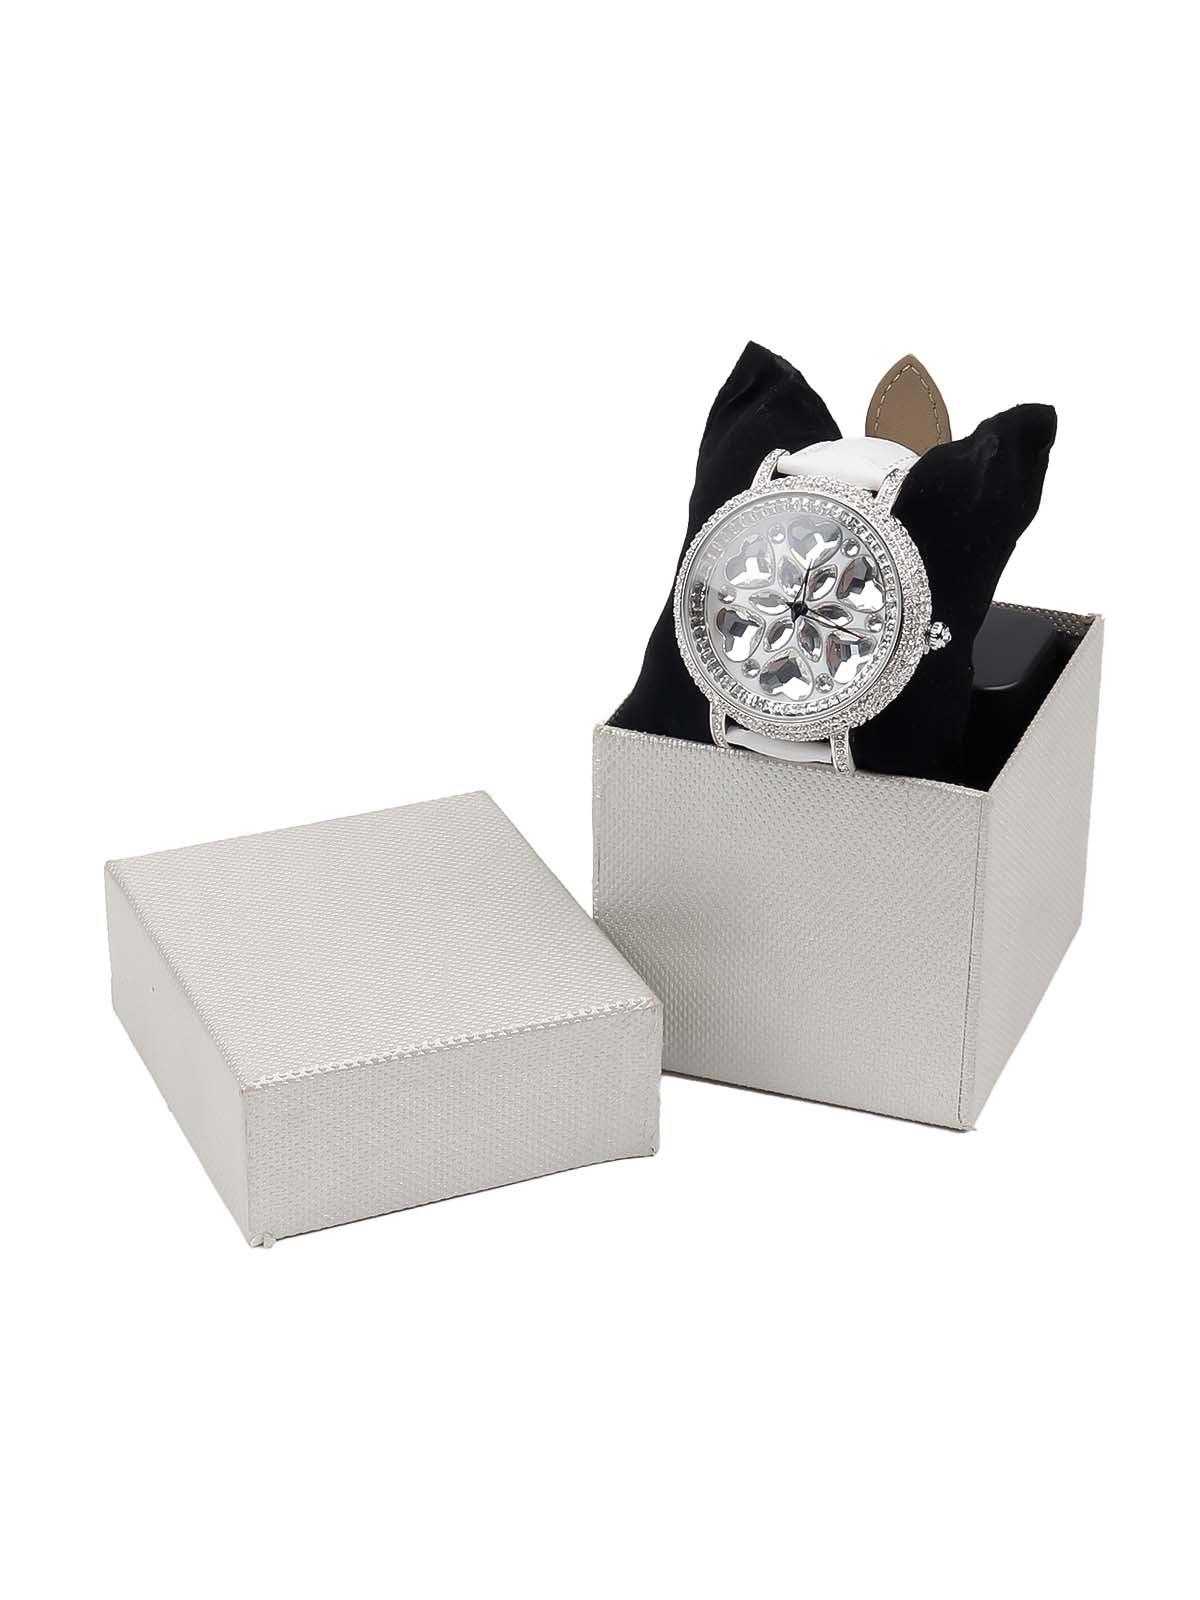 White rounded embellished wristwatch for women - Odette